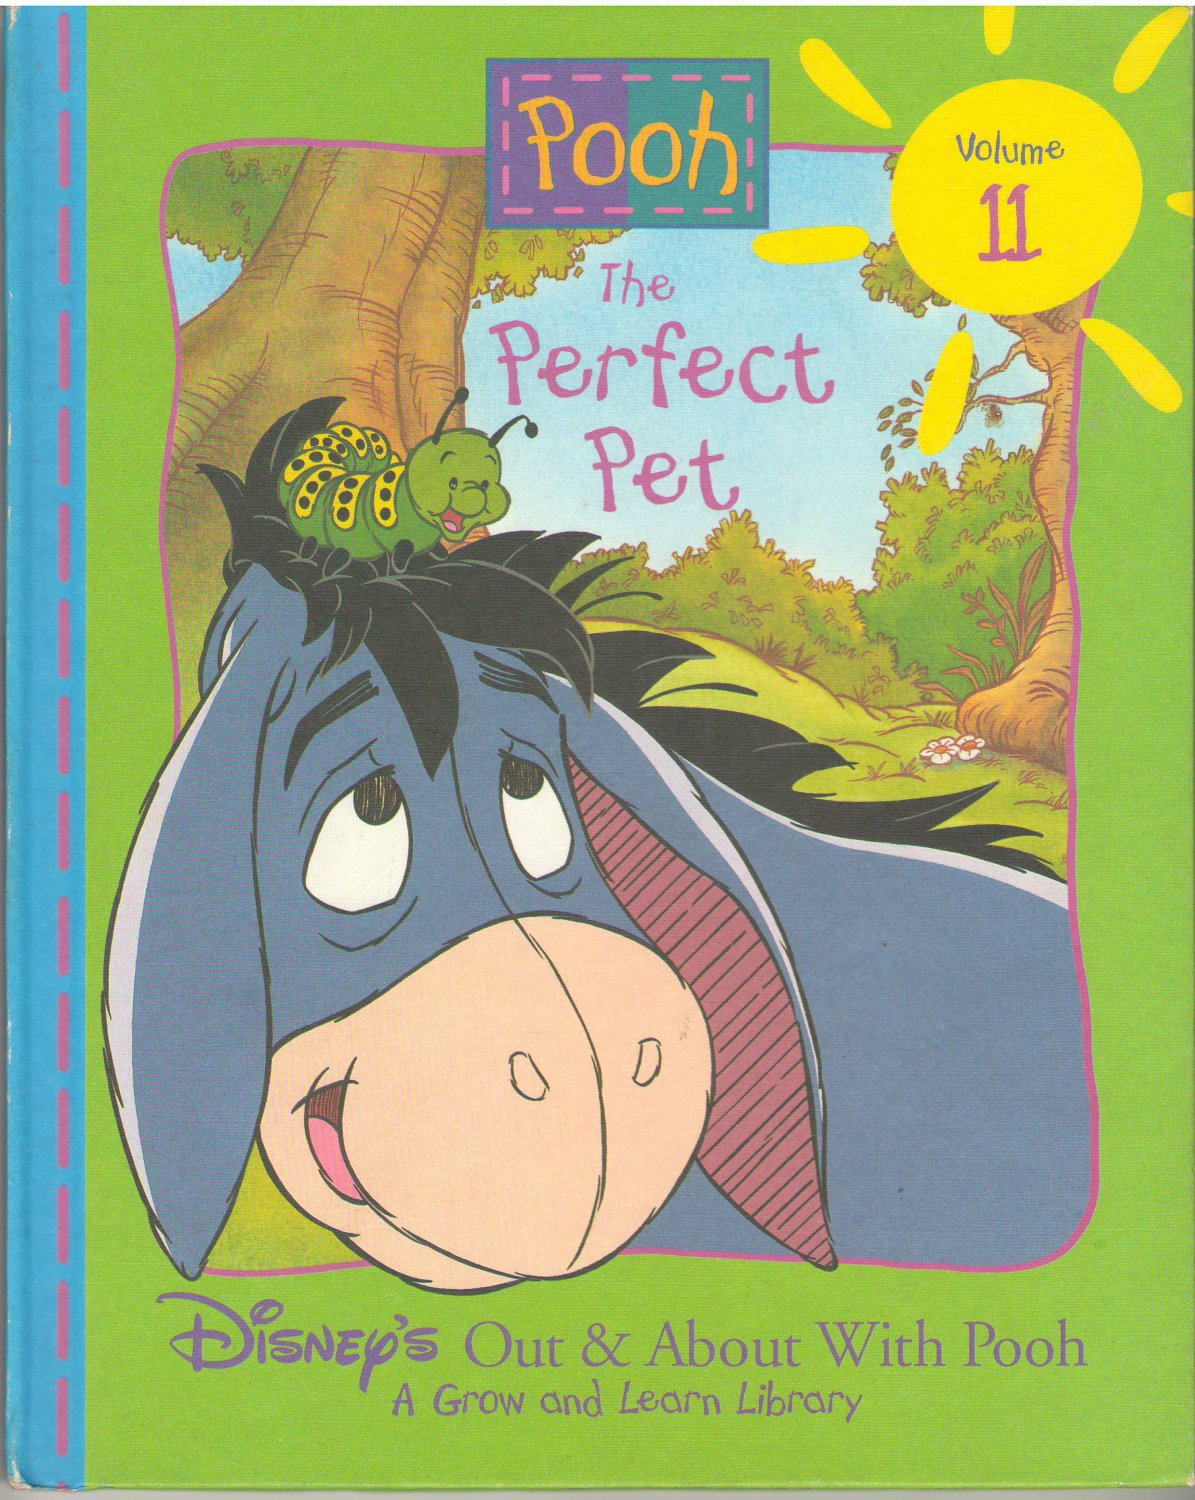 The Perfect Pet by Ronald Kidd Volume 11 (Disney's Out & About With Pooh)